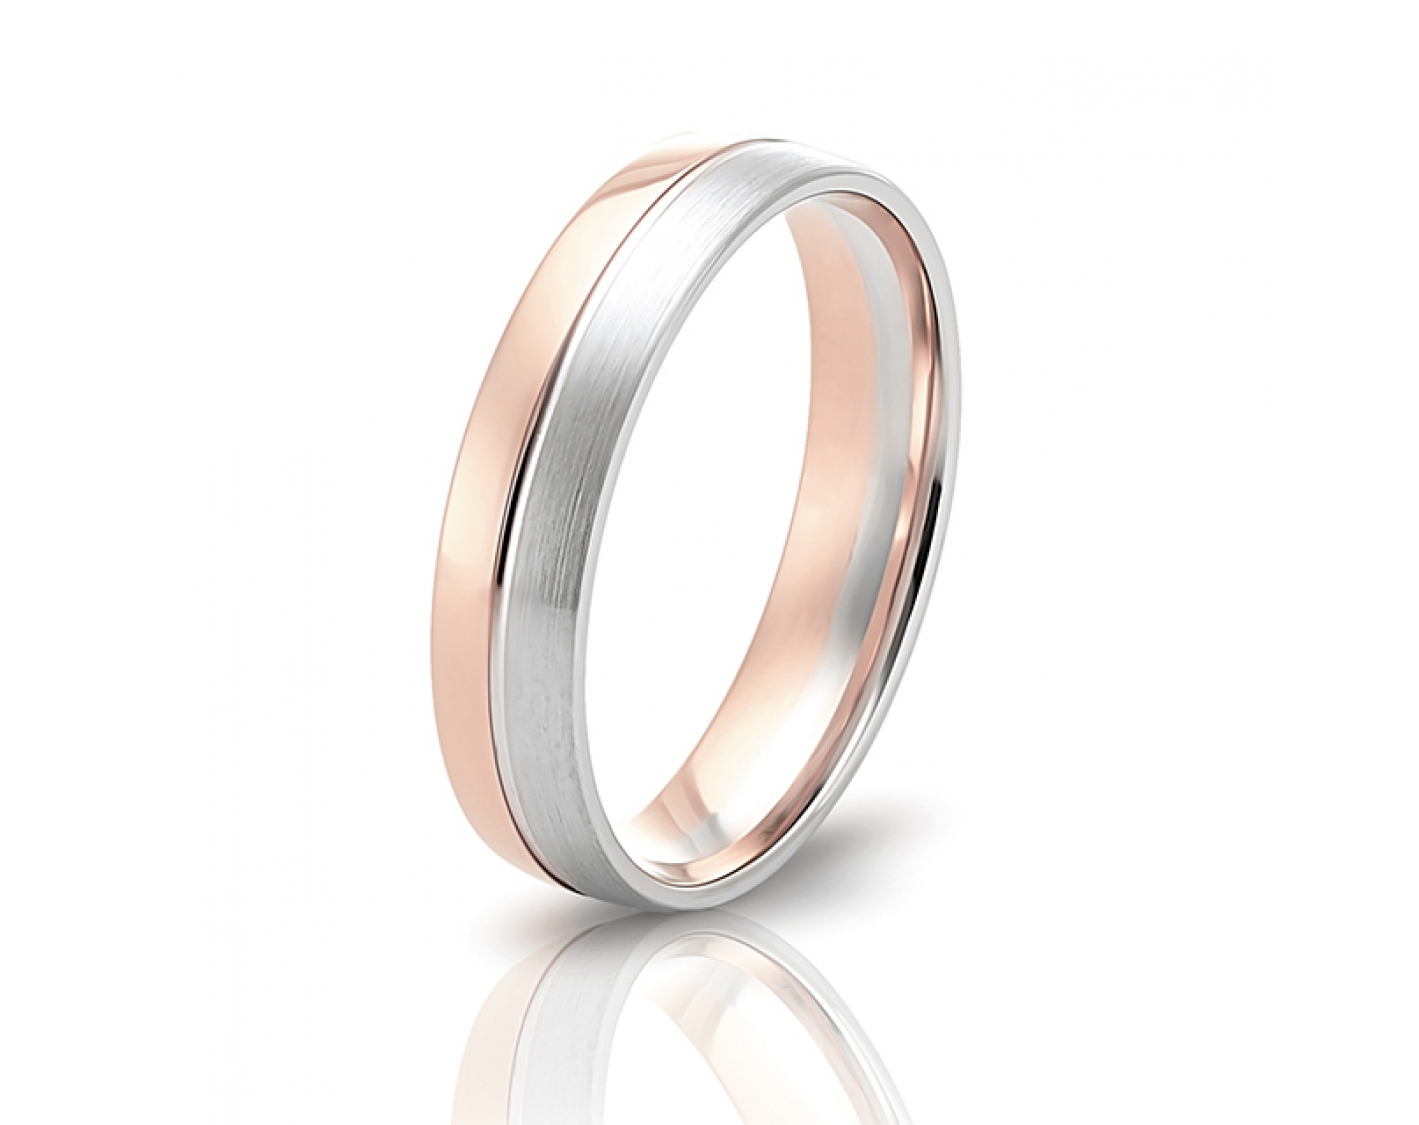 18k rose gold 5mm two-toned* wedding band Photos & images